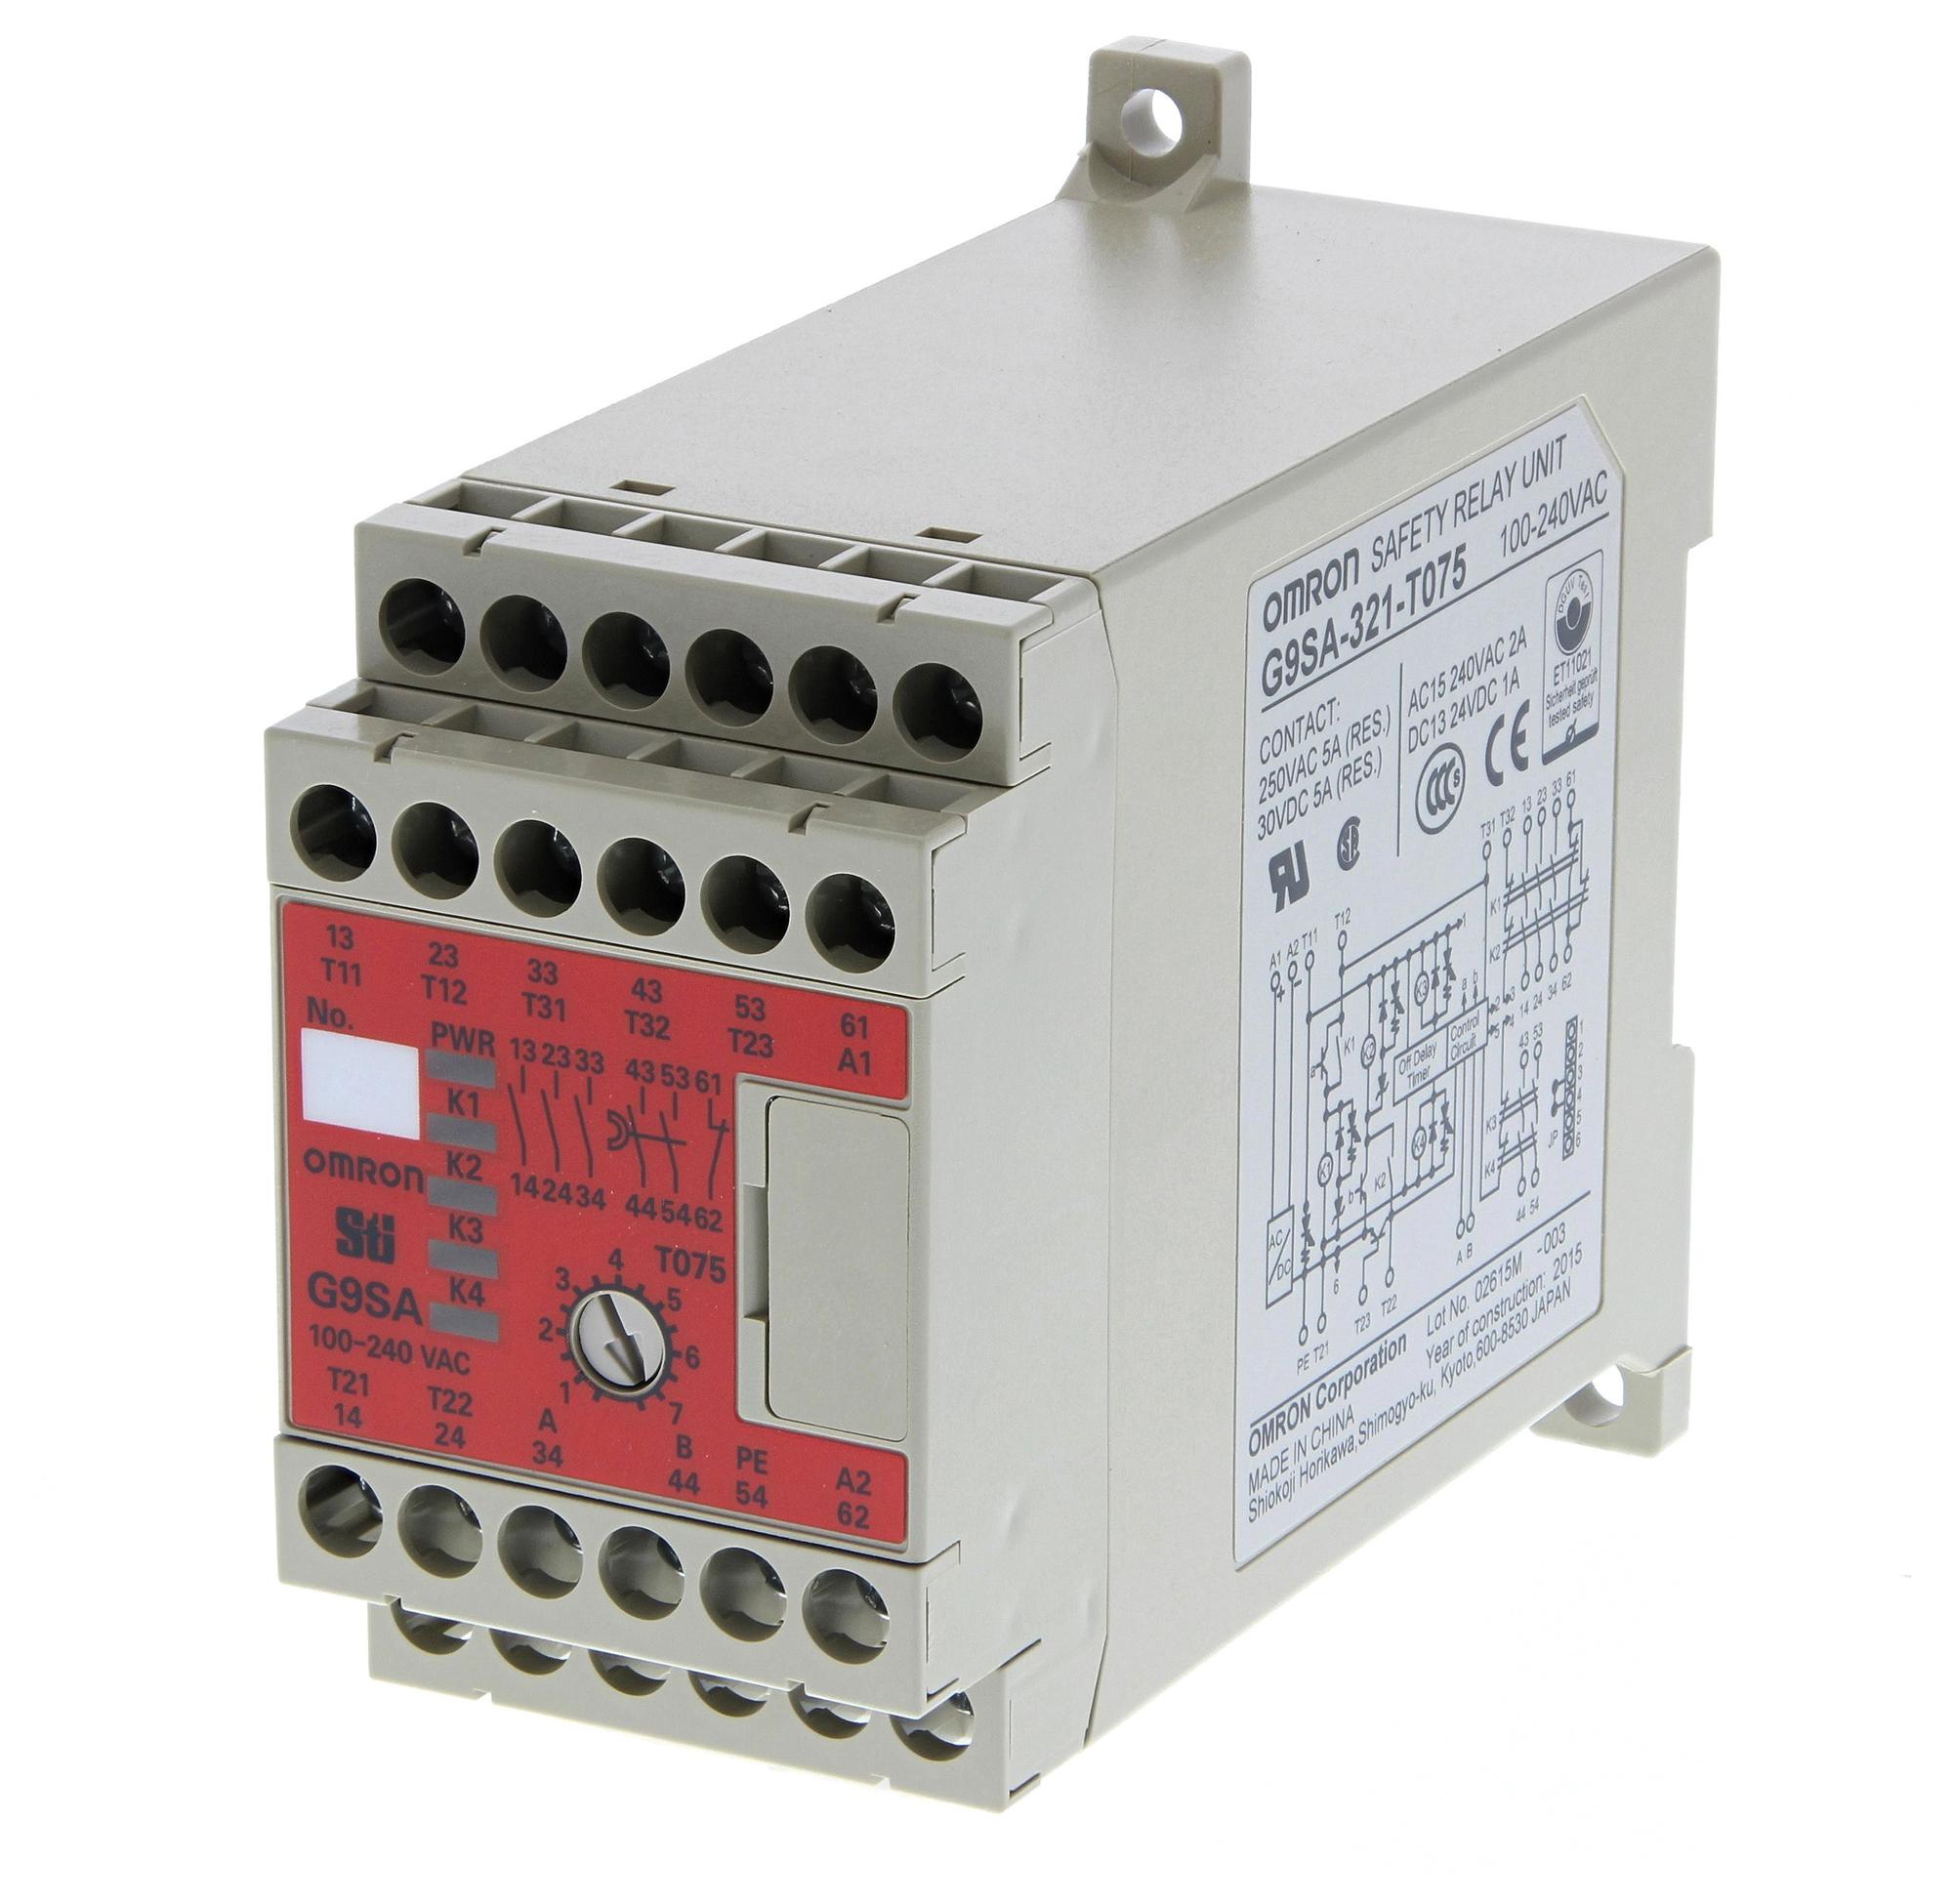 G9SA-321-T075 AC100-240 SAFETY RELAYS OMRON